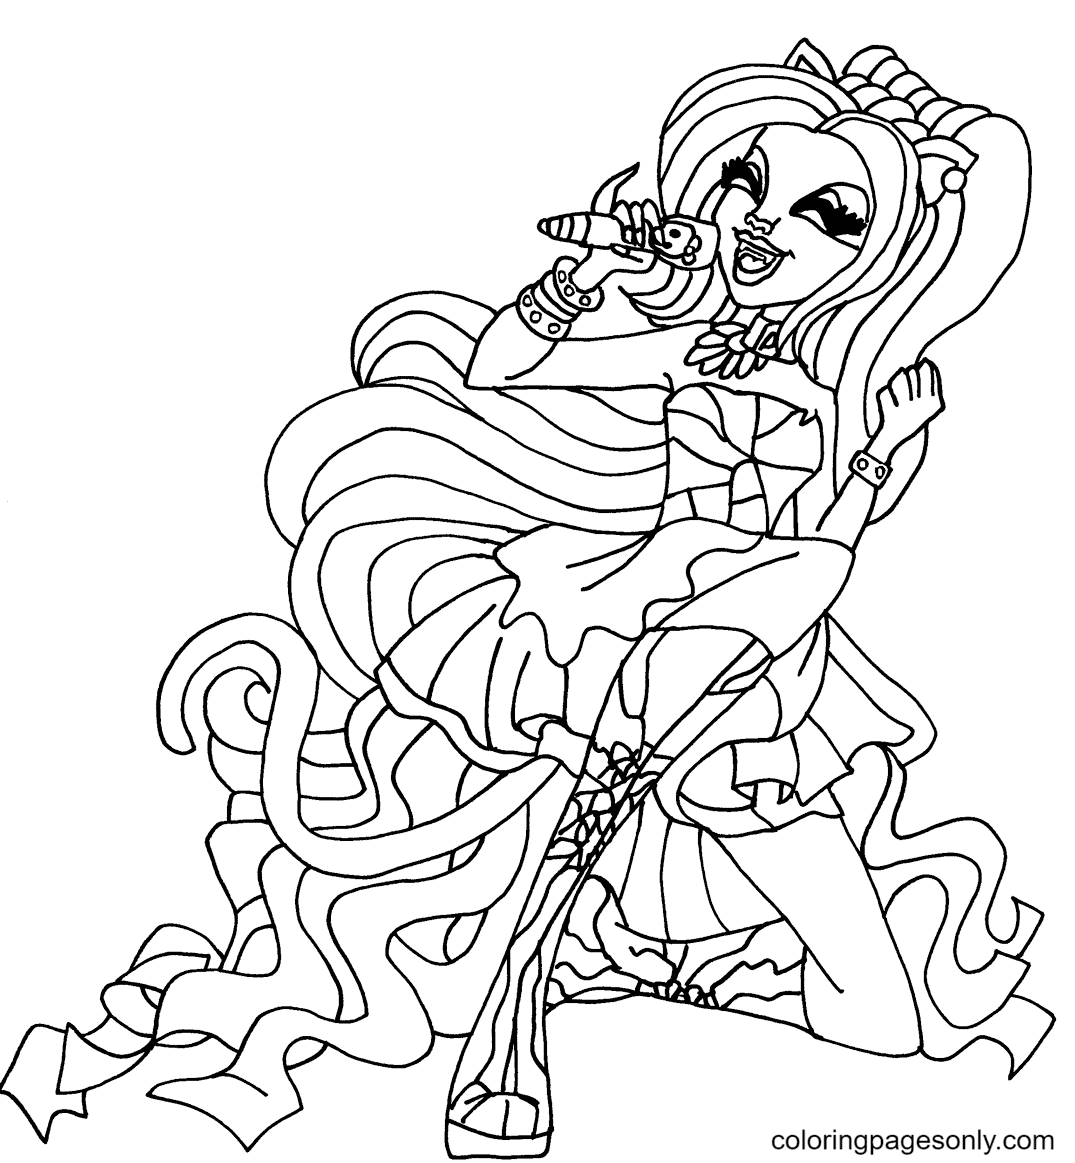 Catty Noir Coloring Pages